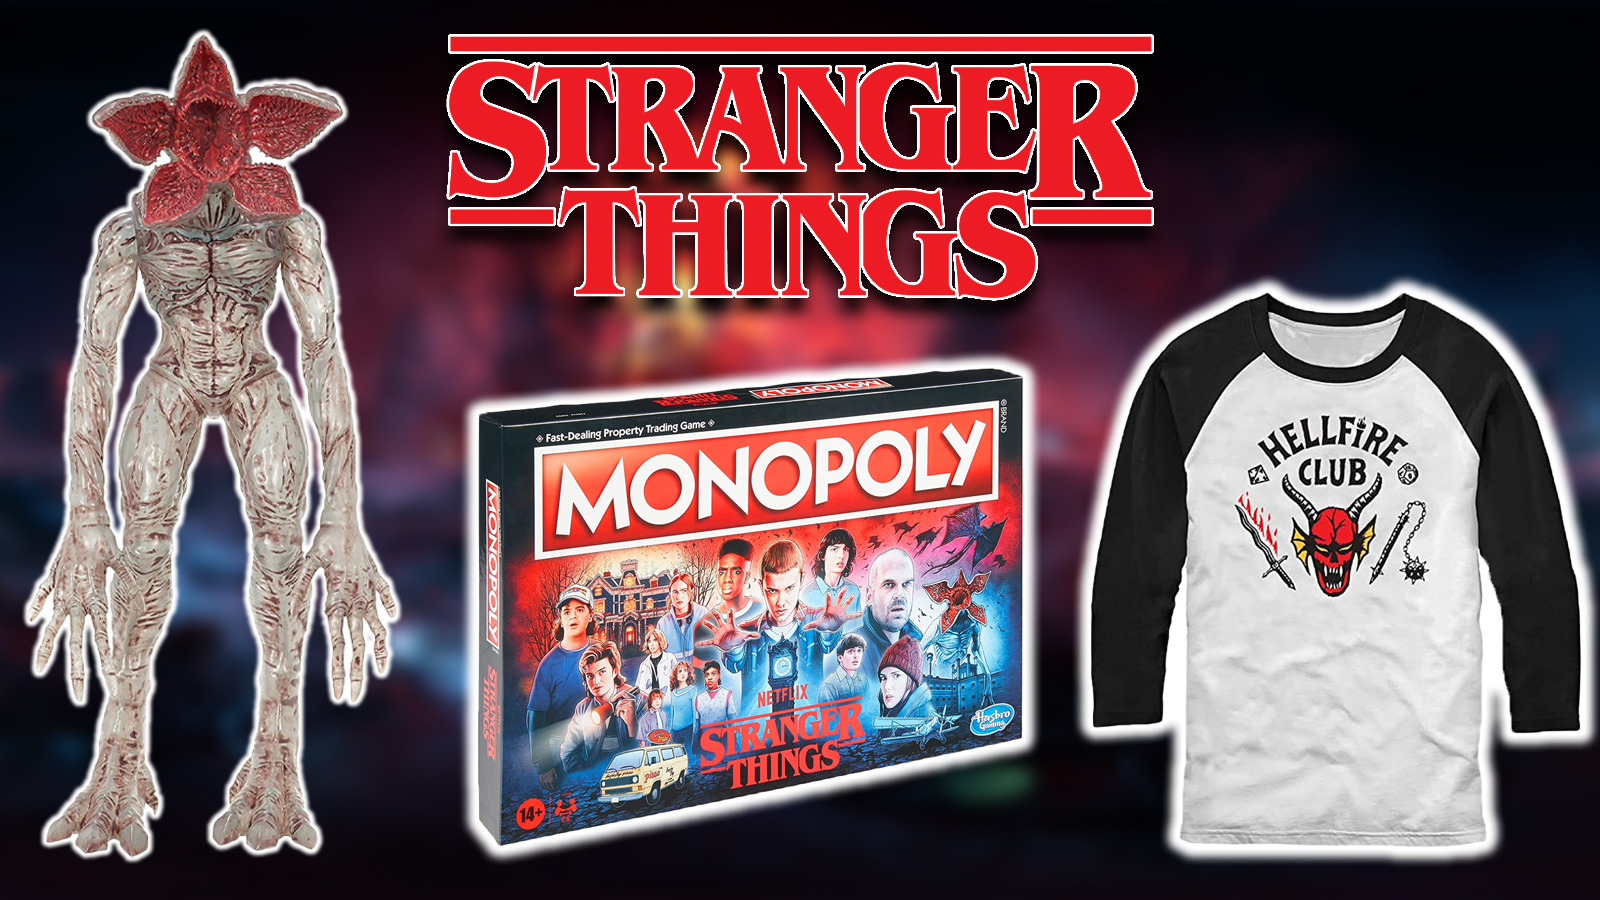 17 Best Stranger Things Products for 2019 - Fun Stranger Things Gifts